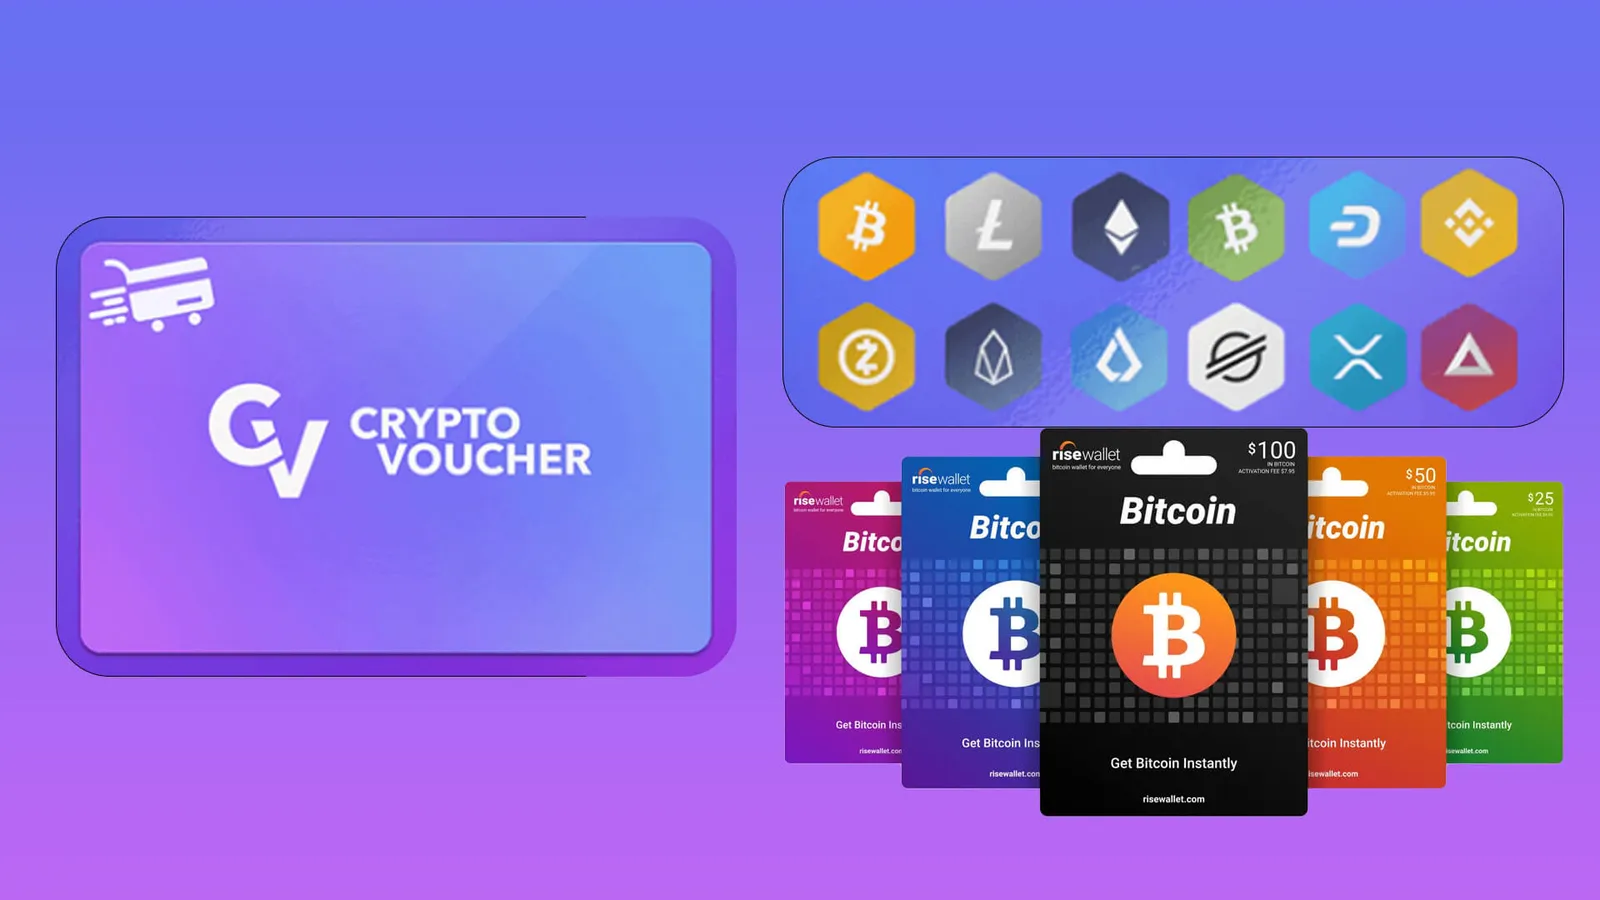 How To Redeem Crypto Voucher? Live Chat